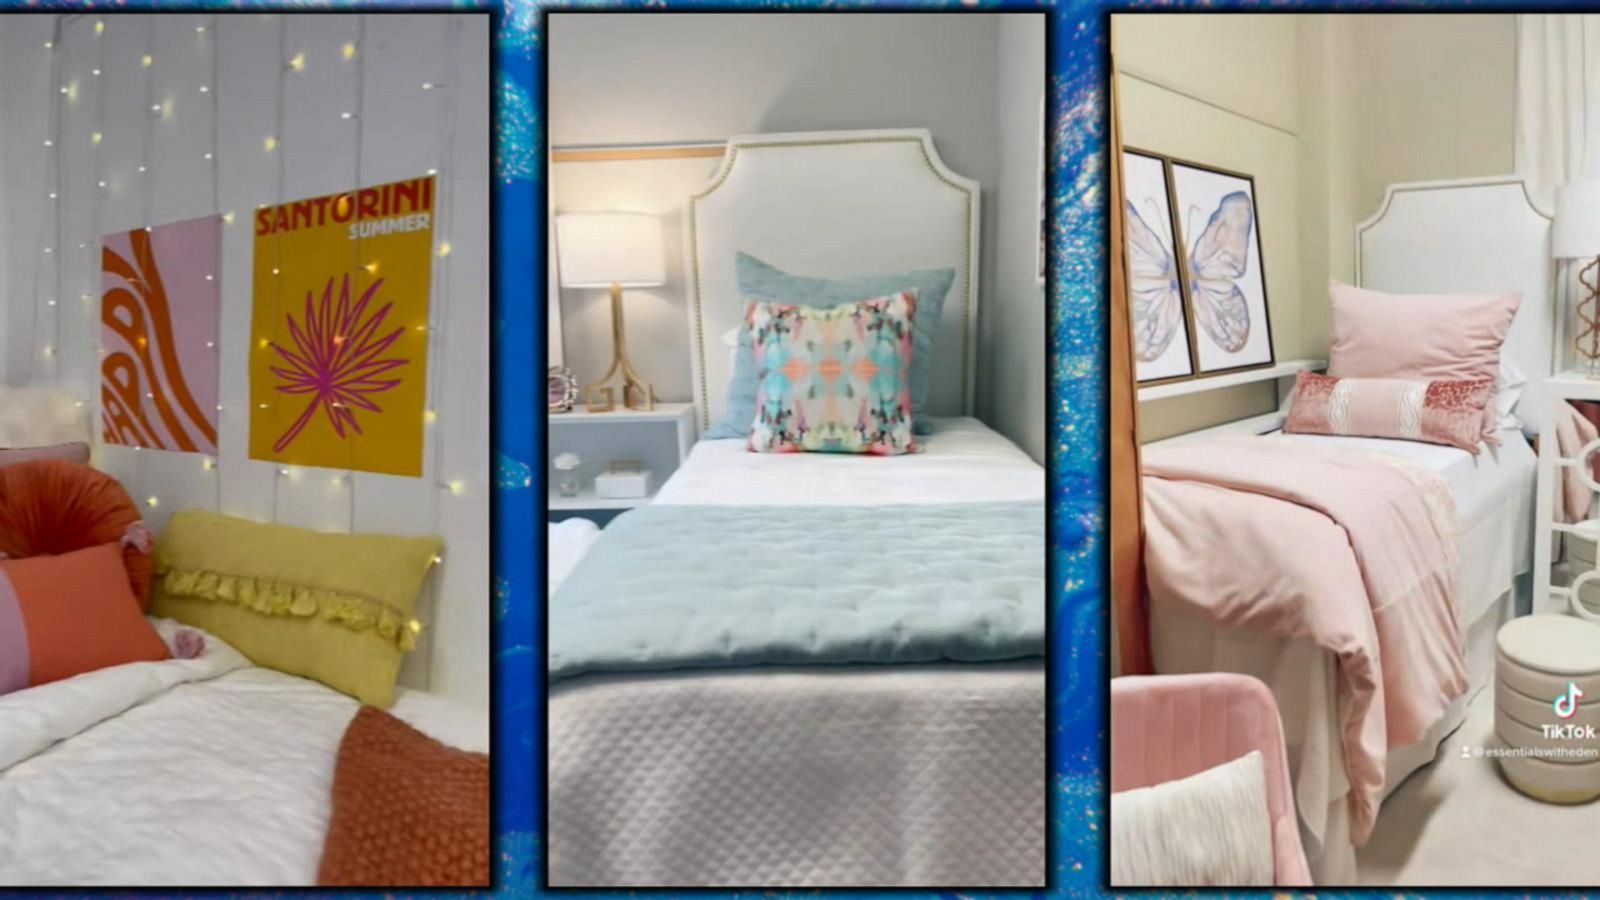 Level up your dorm decor with these TikTok trends - Good Morning America